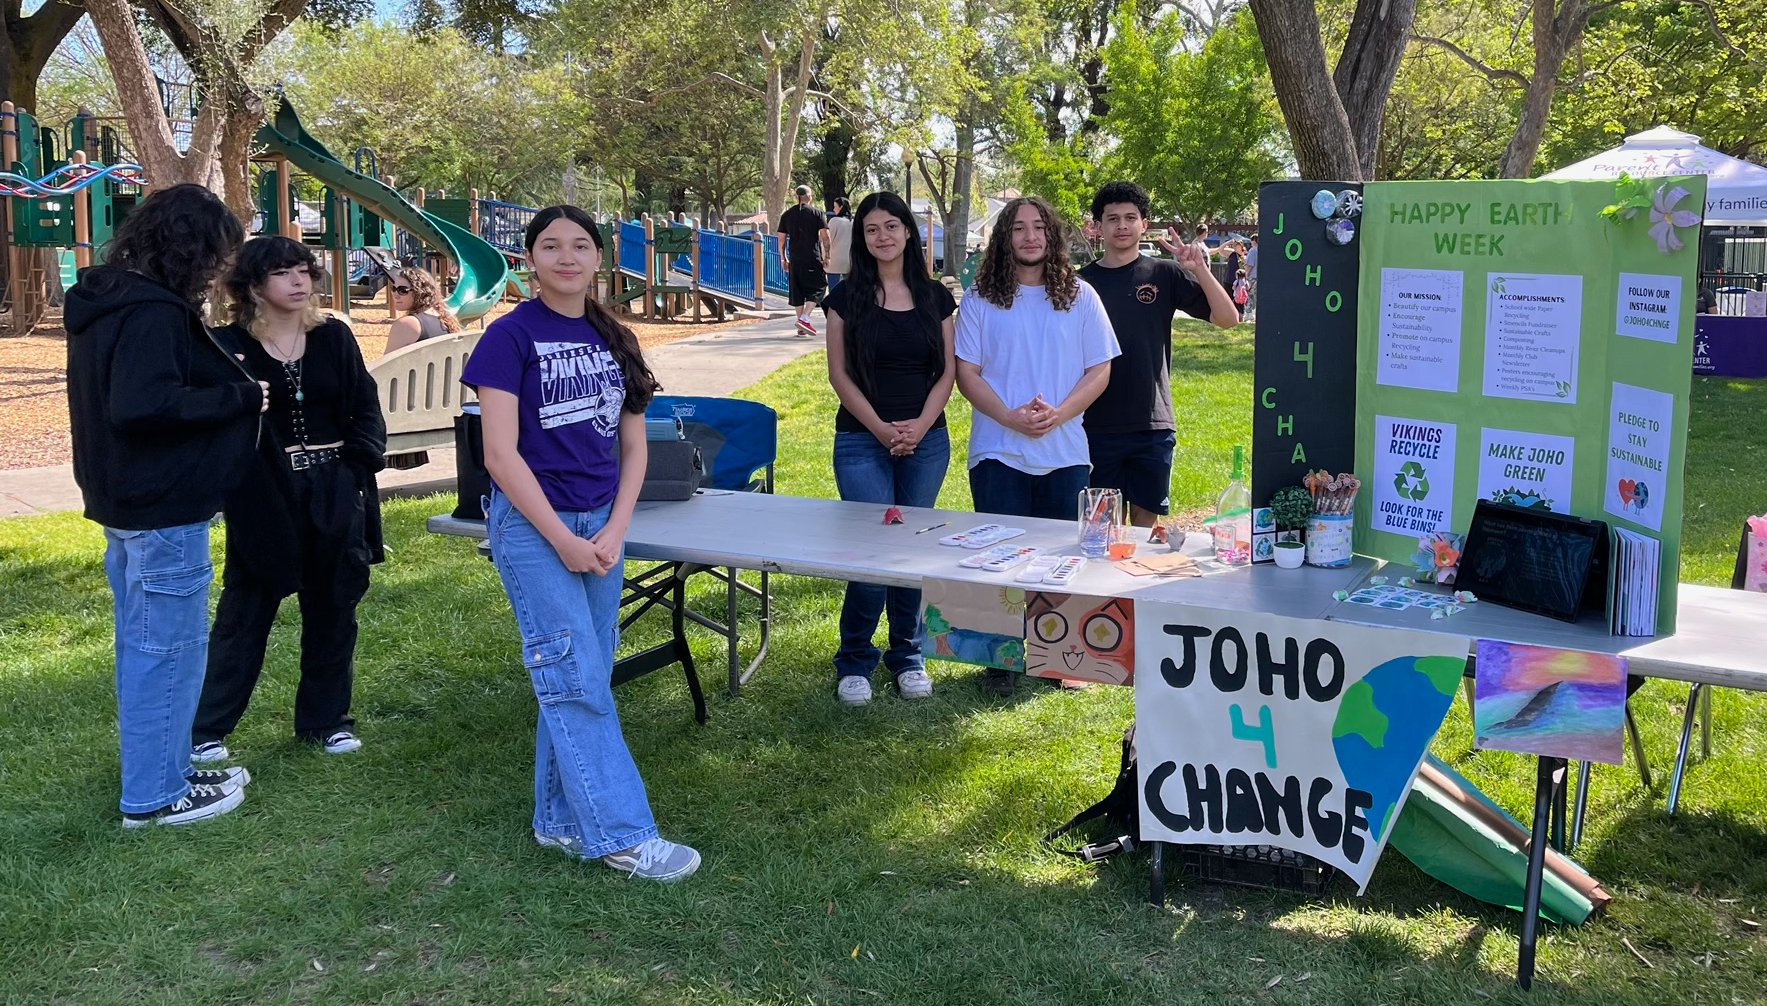 joho 4 change at mcs and city of modesto earth day event